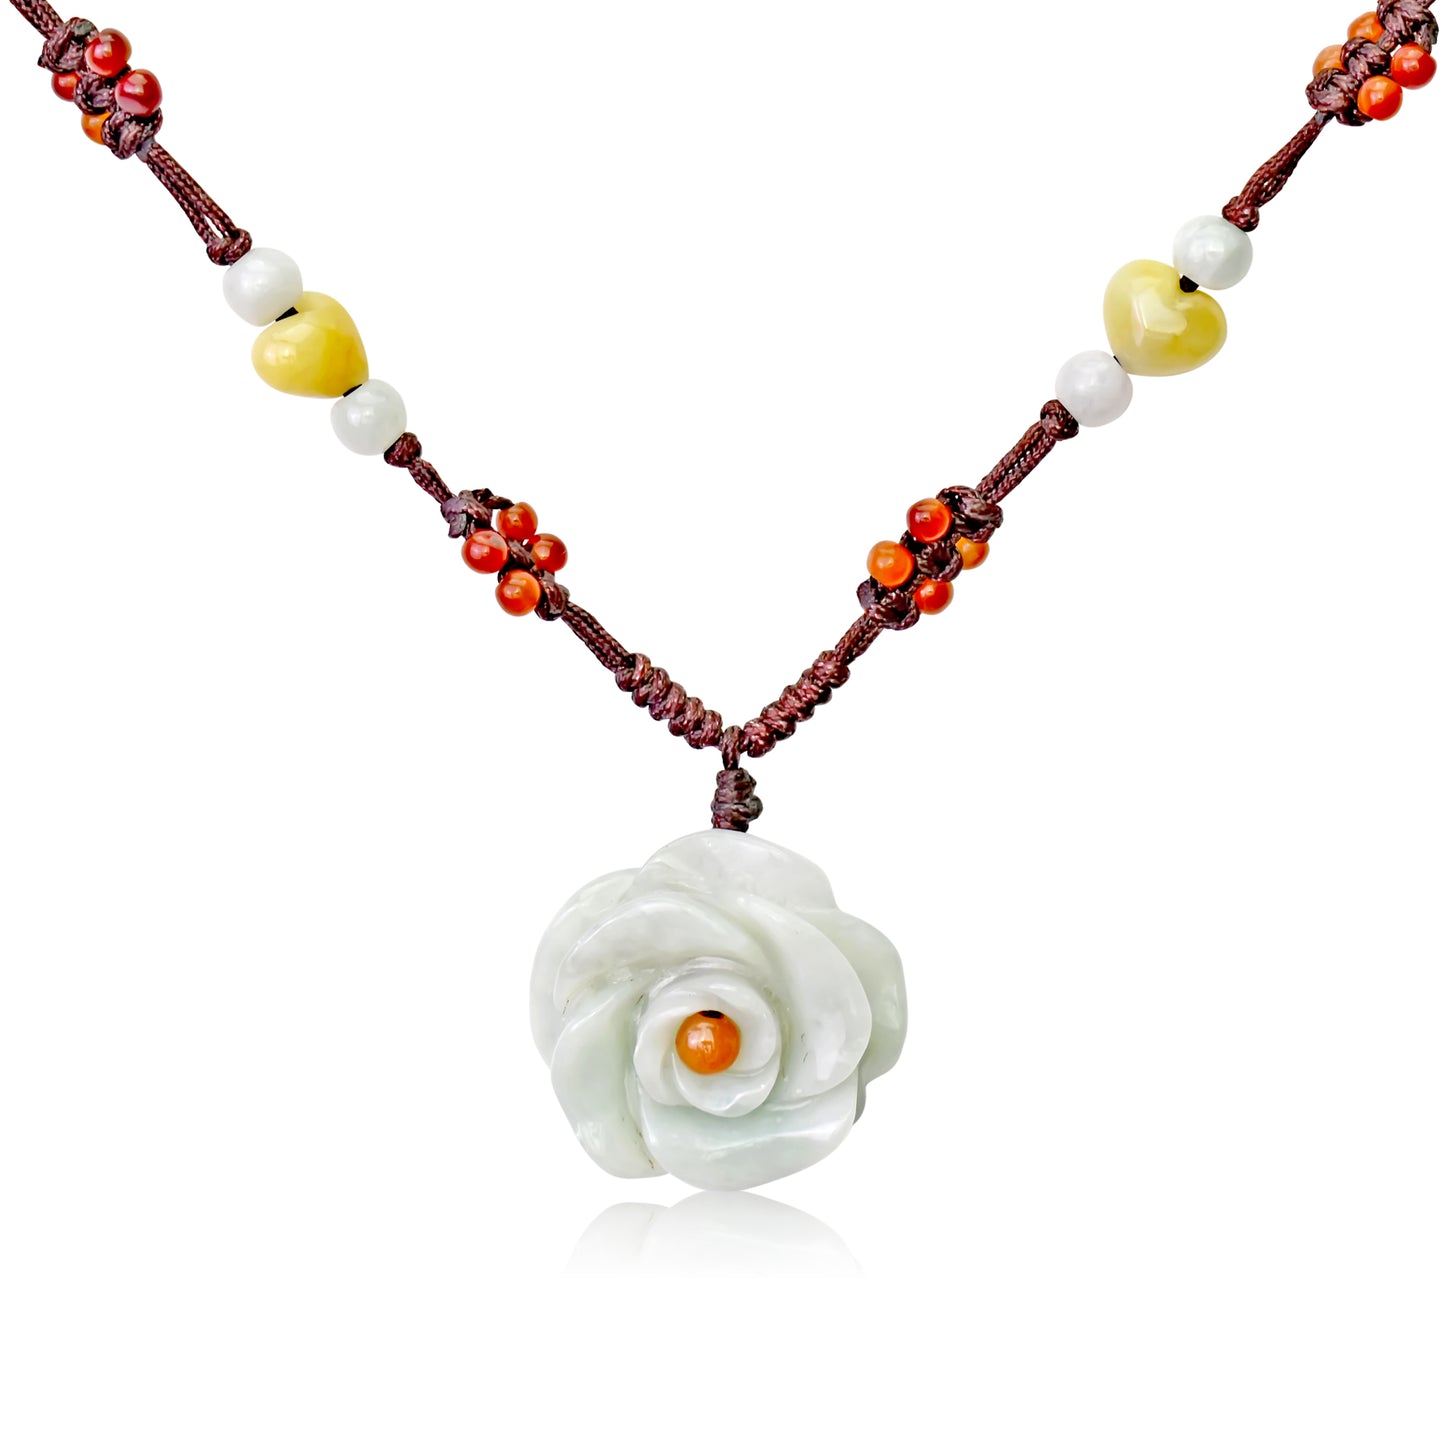 Wear the Rose Blossom Flower Necklace with Pride